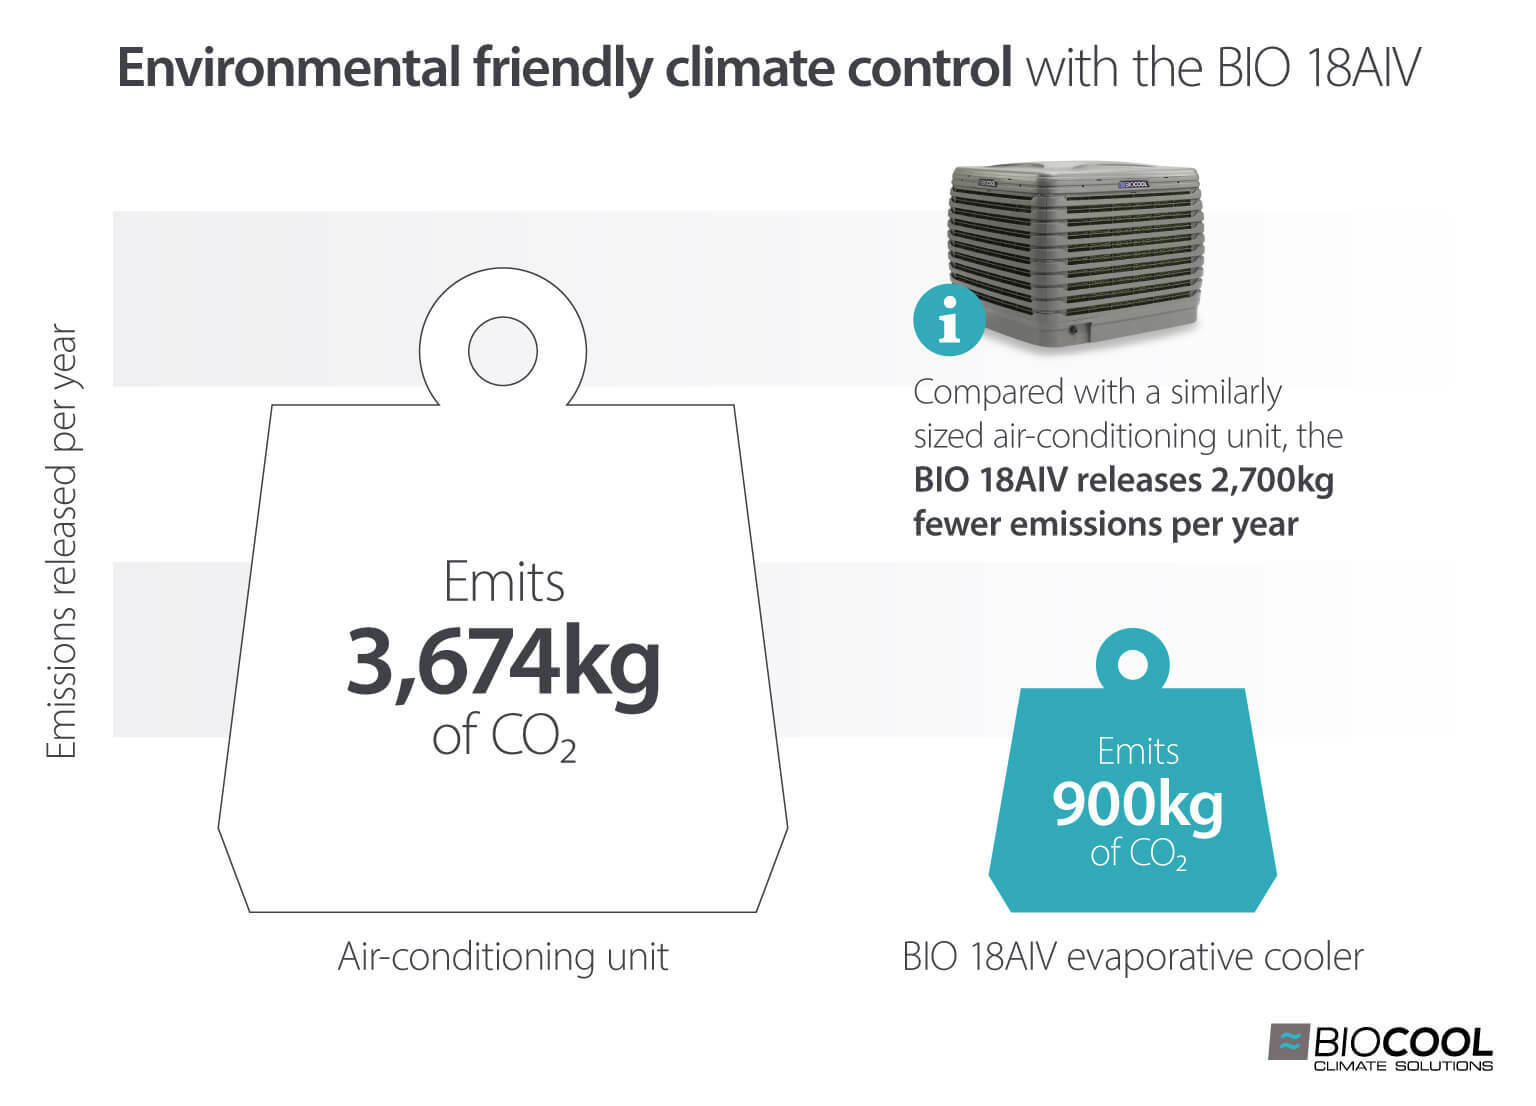 How the environmentally friendly Biocool BIO 18AIV evaporative cooler releases 2,700kg fewer emissions per year than air conditioning units - Biocool infographic image